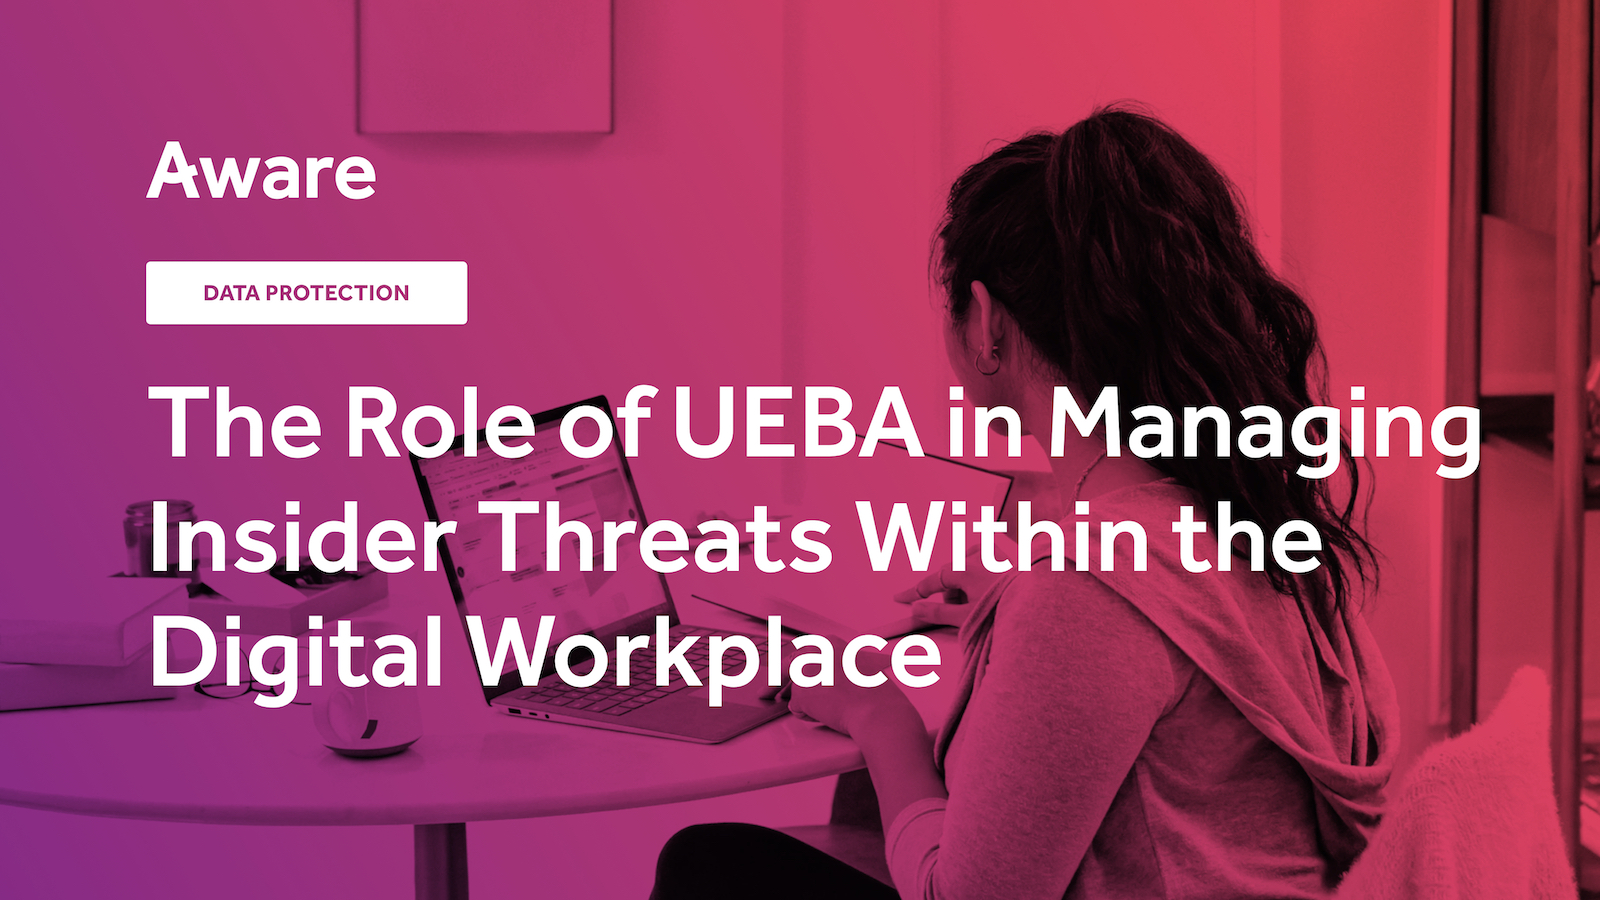 The Role of UEBA in Managing Workplace Insider Threats